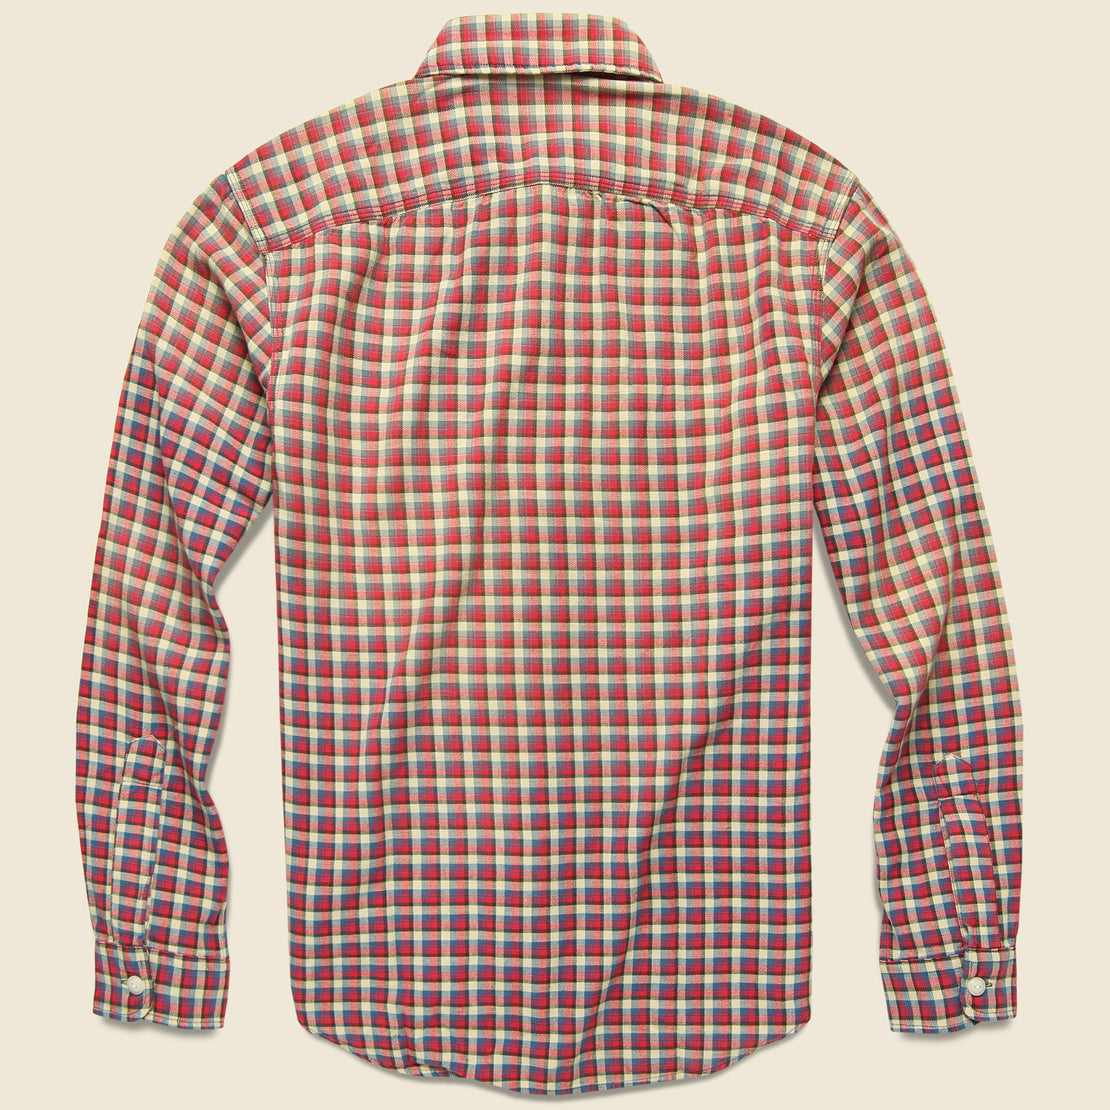 Lee Workshirt - Red/Blue Plaid - RRL - STAG Provisions - Tops - L/S Woven - Plaid